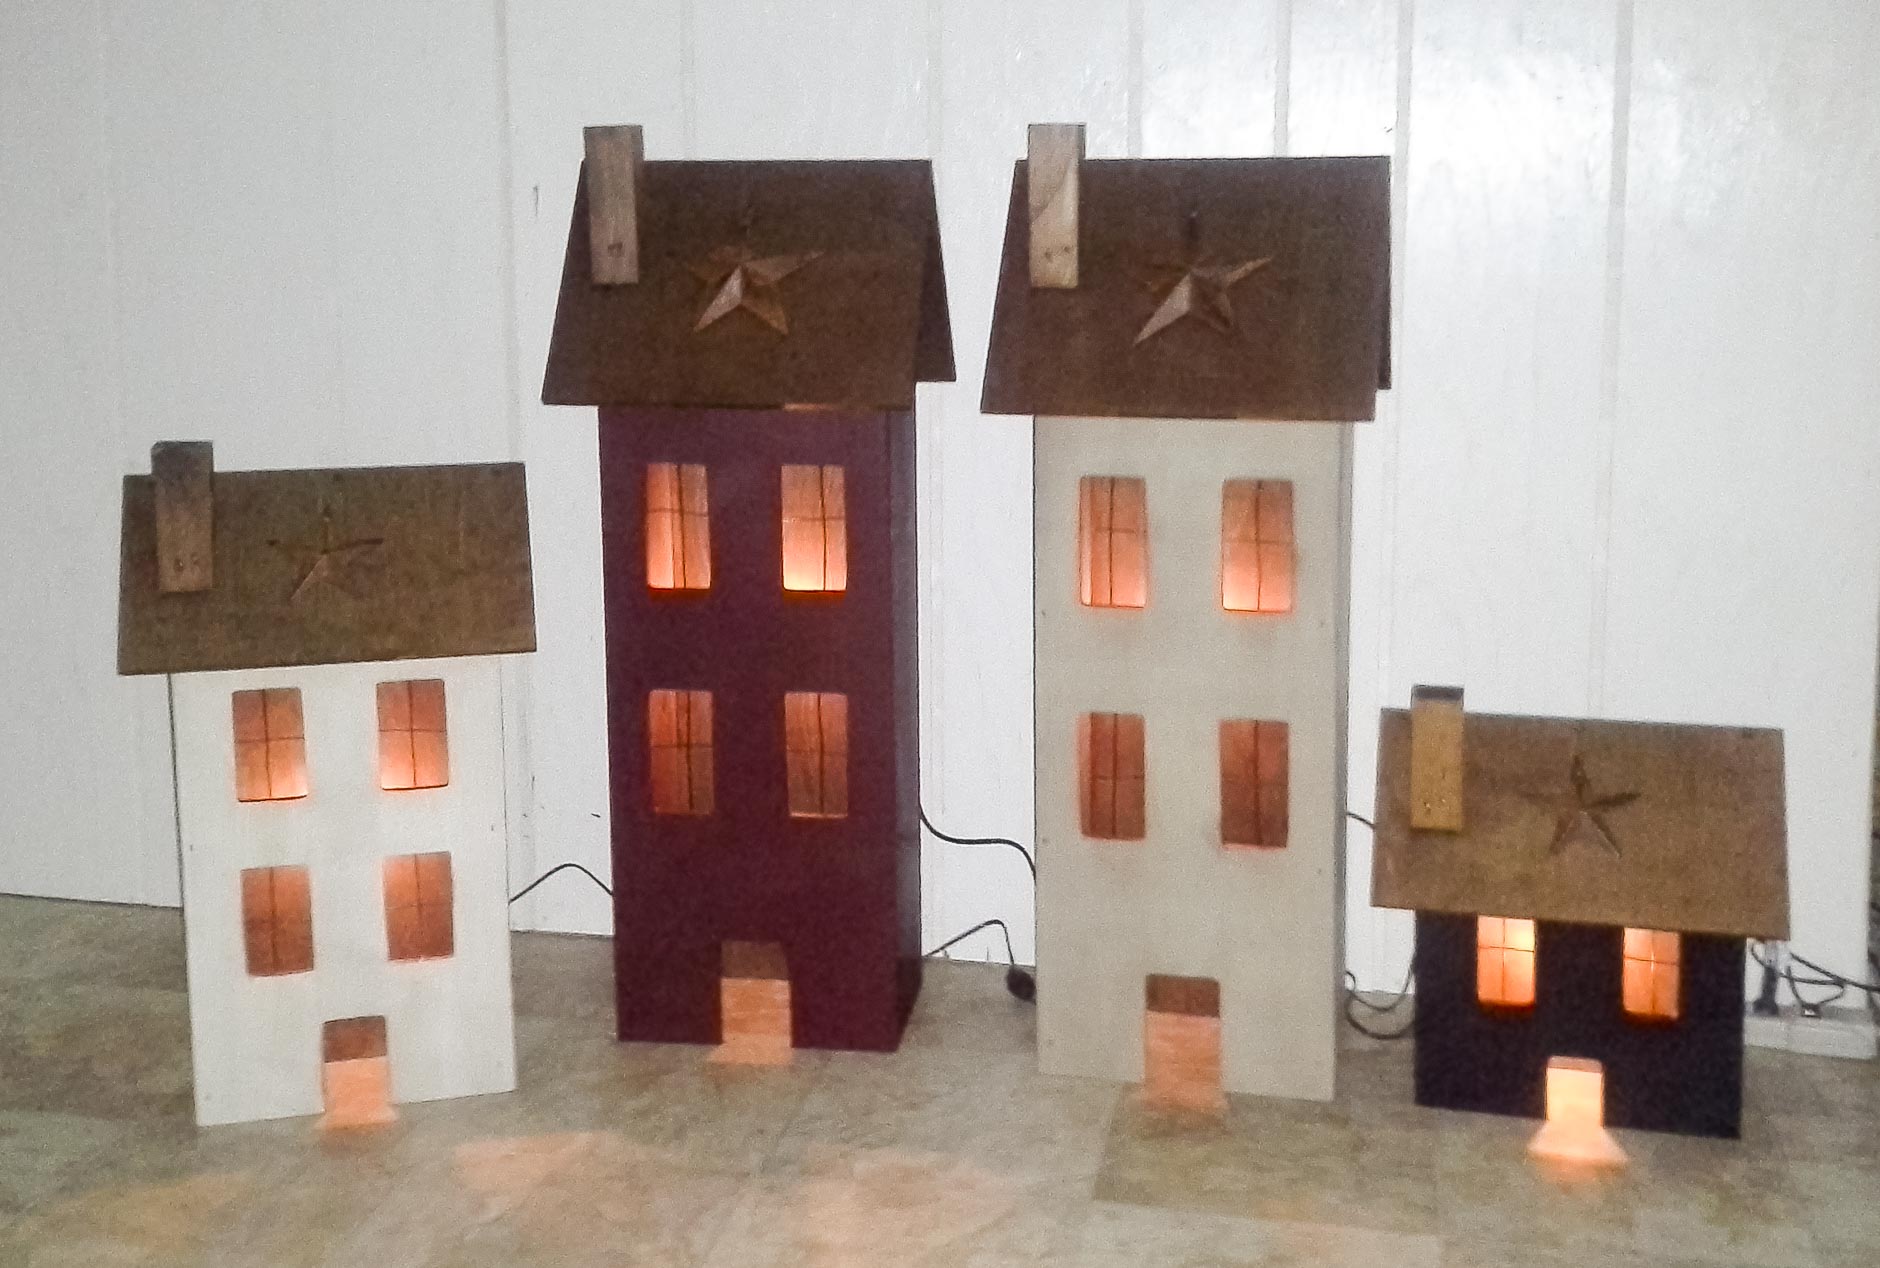 Lighted Houses